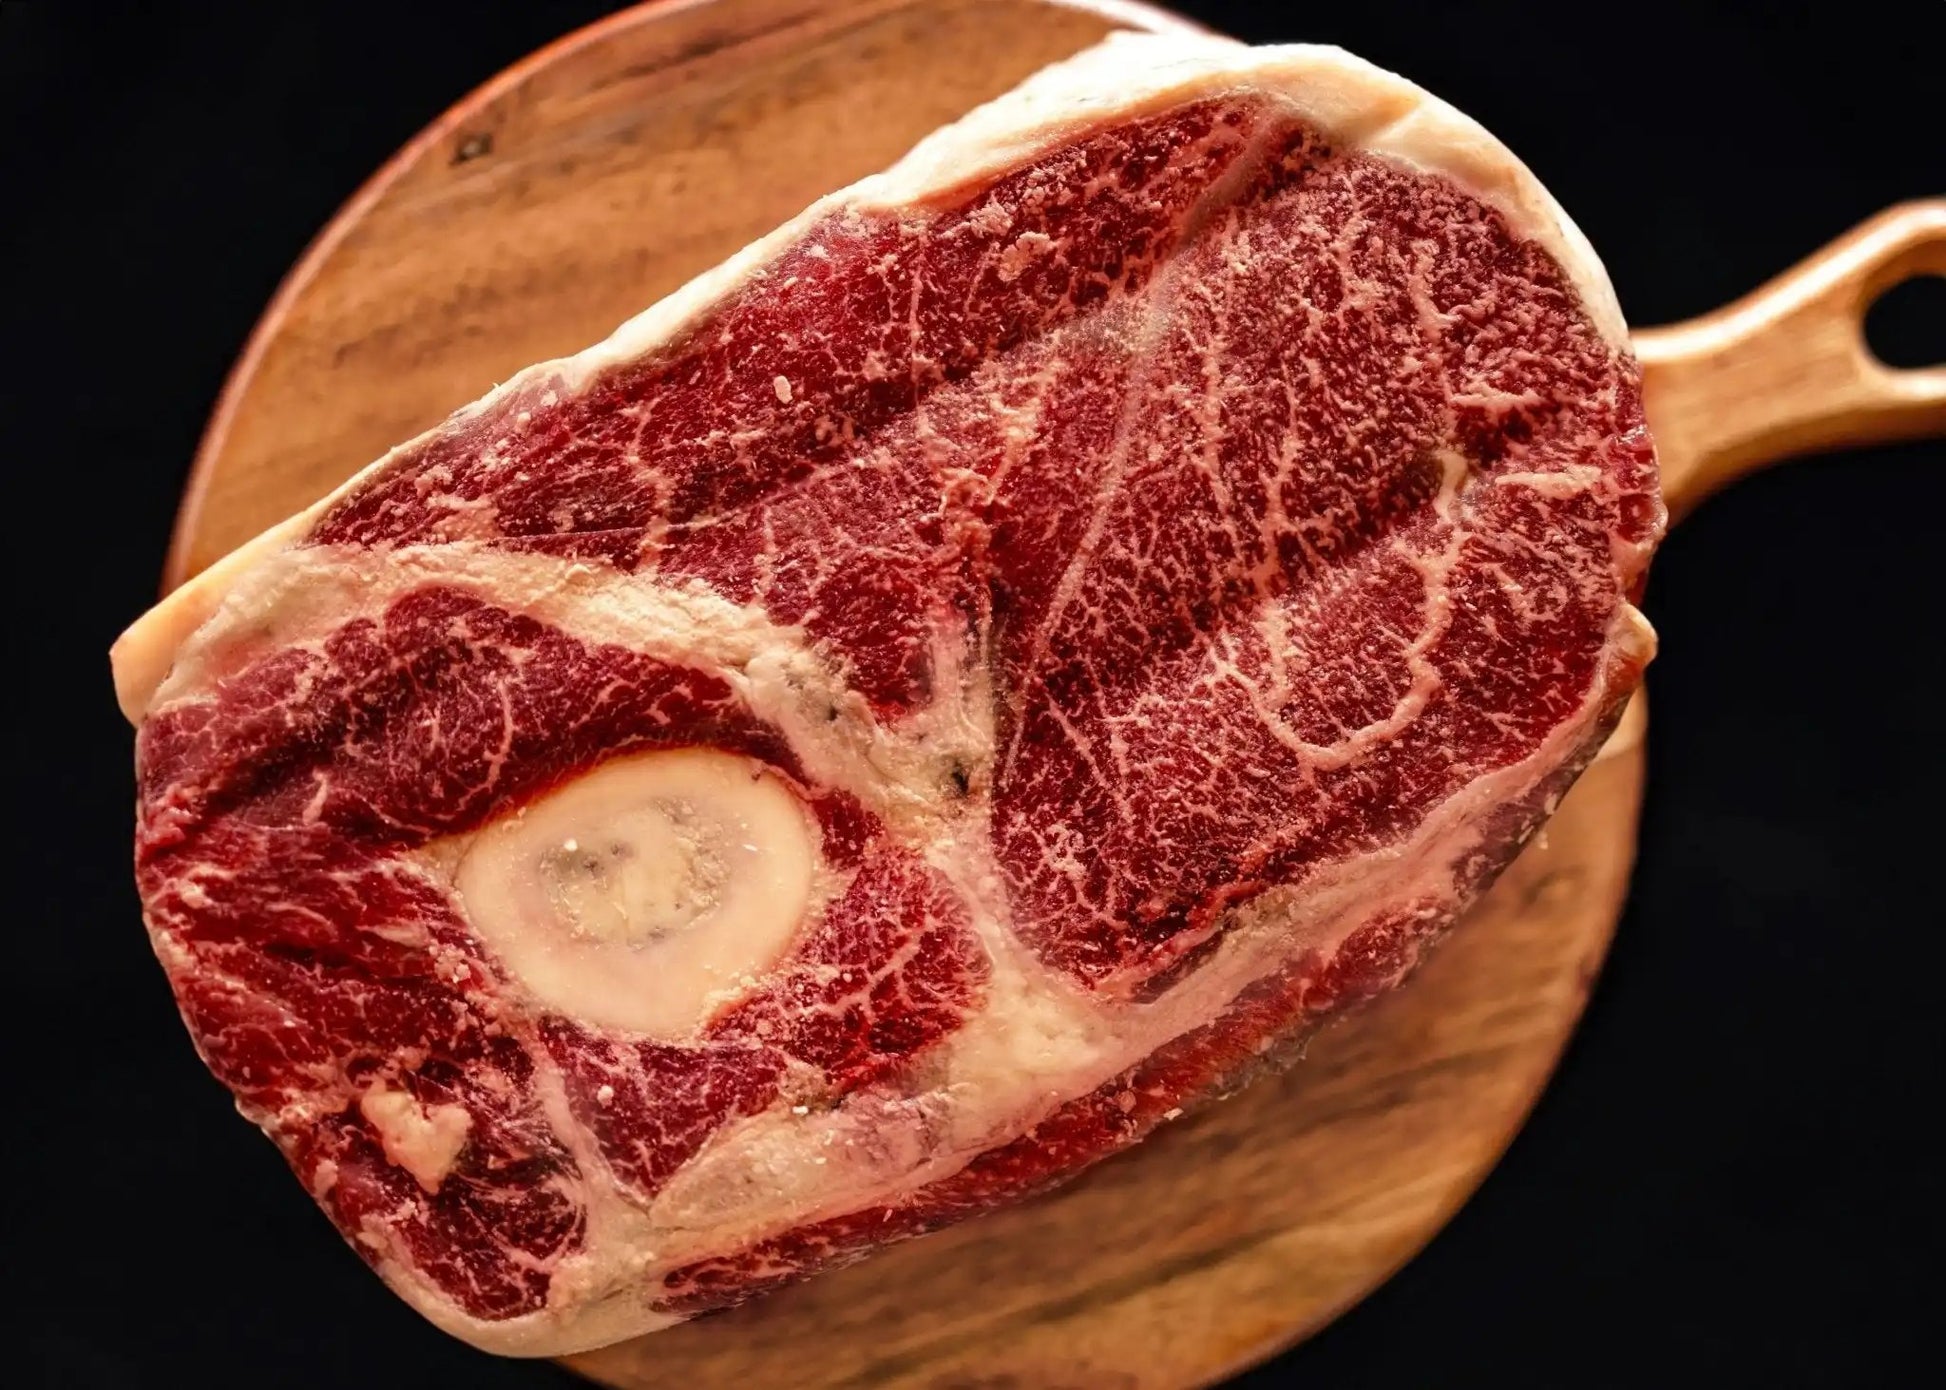 100% All-Natural Grass-Fed Pasture-Raised Wagyu Arm RoastIntroducing Hufeisen Ranch's 100% All-Natural Grass-Fed Pasture-Raised Wagyu Arm Roast, the perfect cut for succulent and flavorful dishes. This primal cut is source100%The Hufeisen-Ranch (WYO Wagyu)